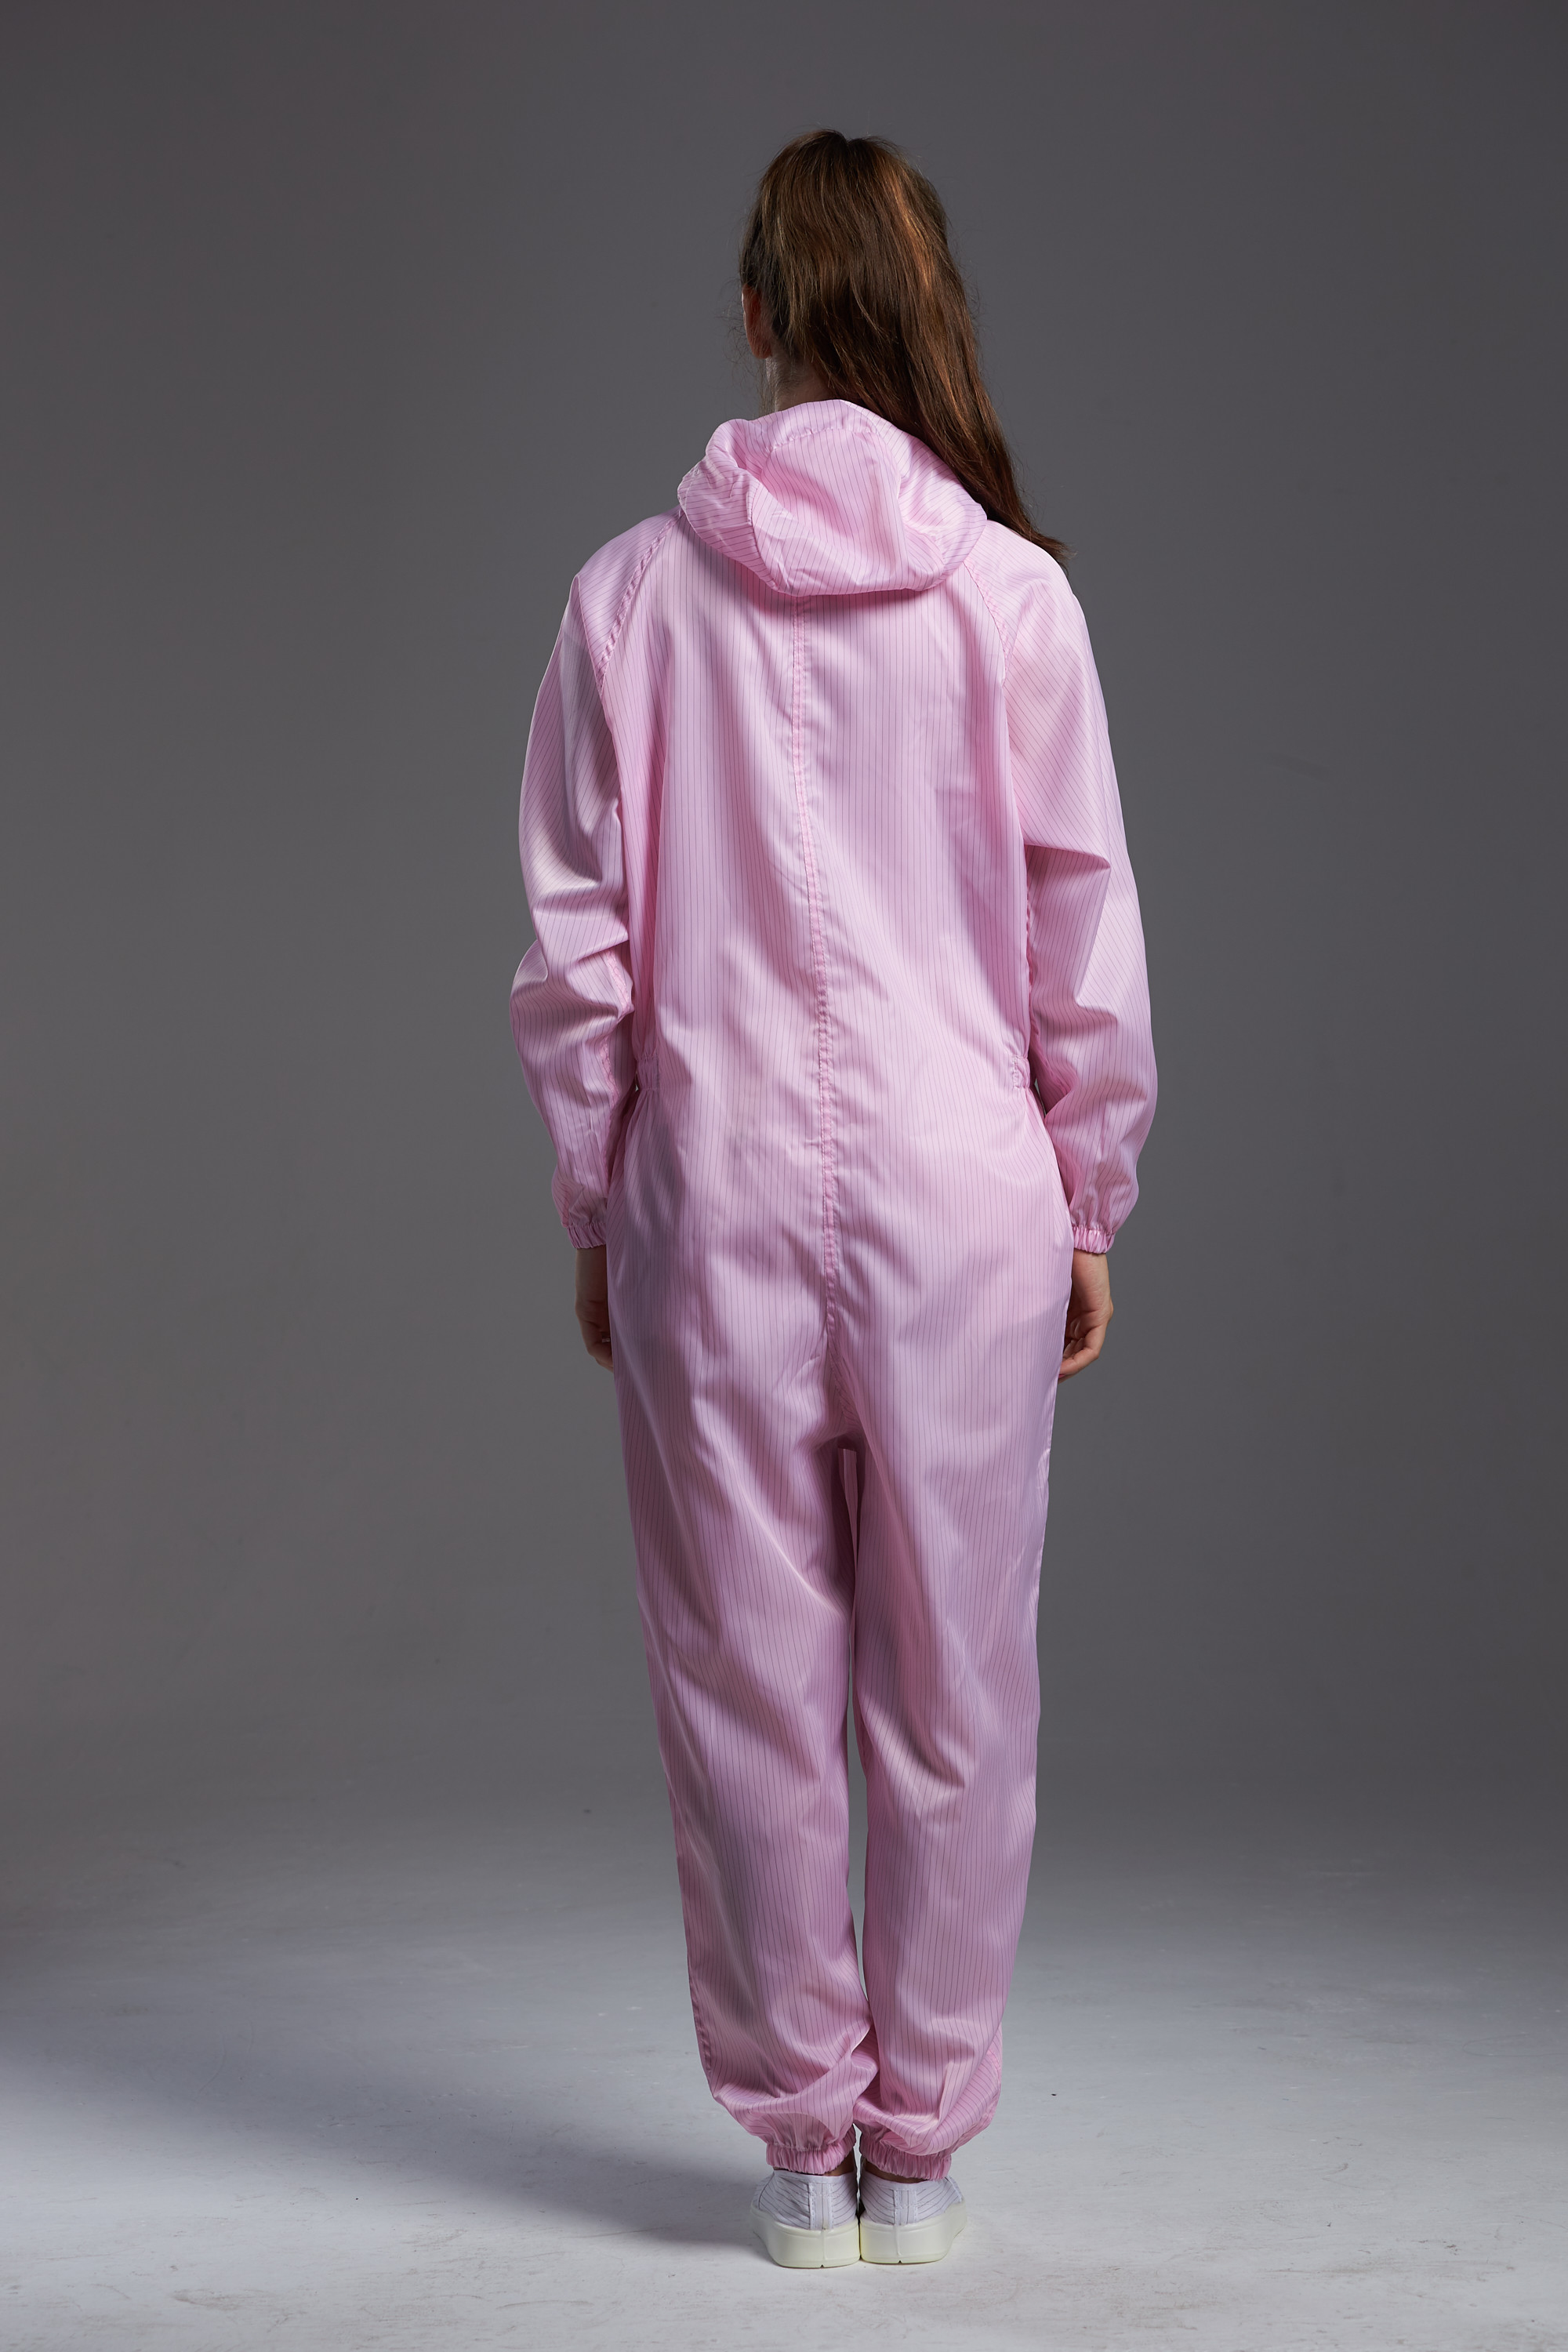 Best Cleanroom Garment Resuable Autoclave hooded Coverall small pink durable resuable in Pharmaceutical Workshop wholesale